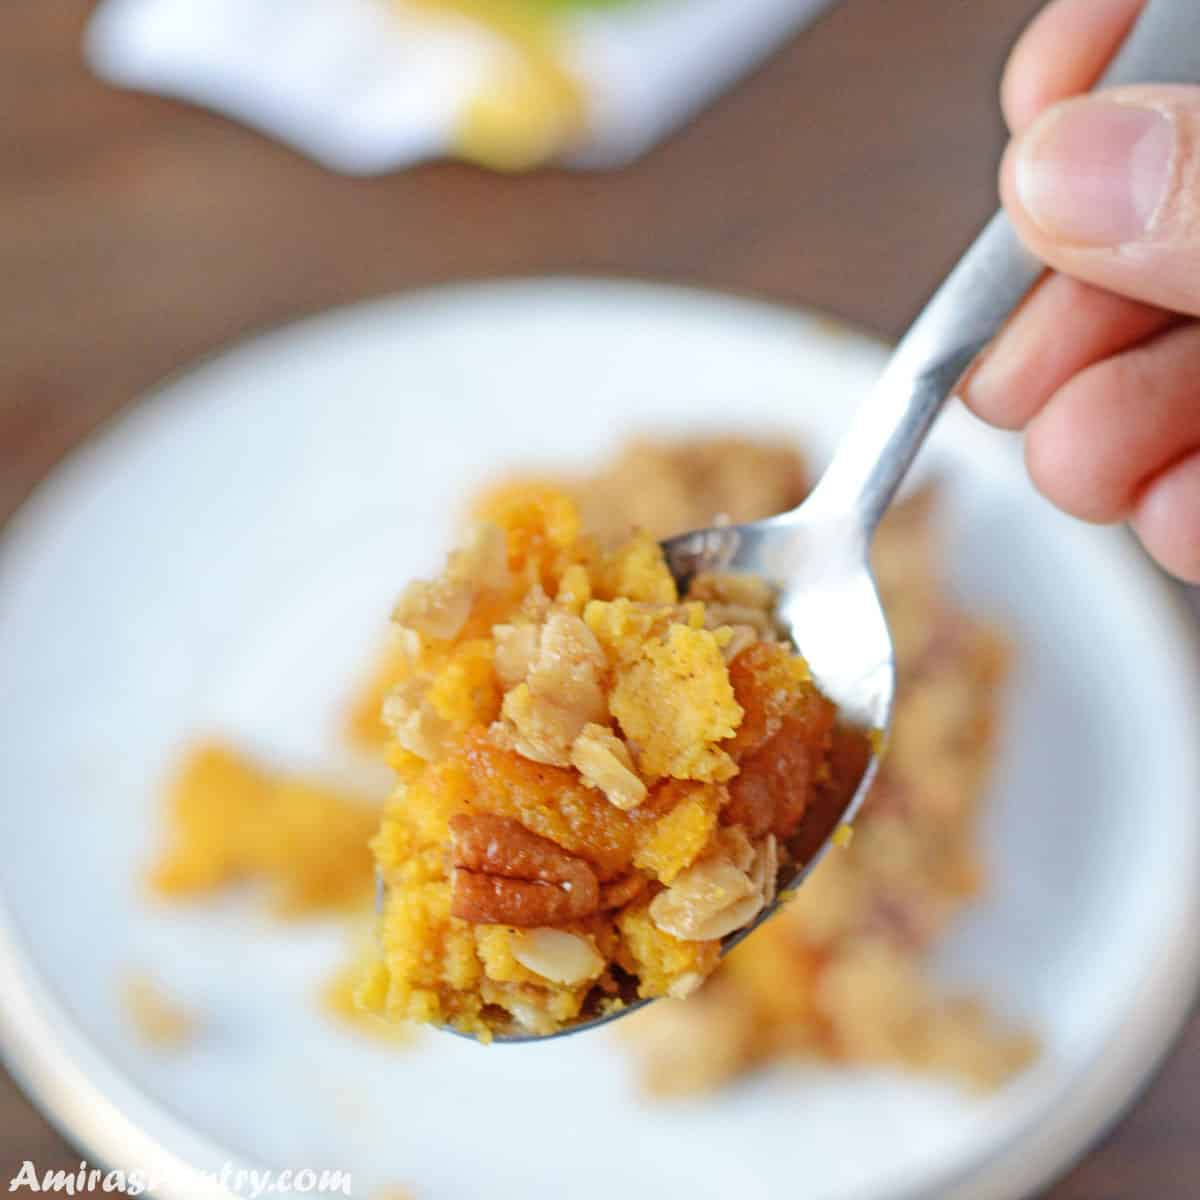 A hand holding a spoon scooping some butternut squash with the crunchy topping.